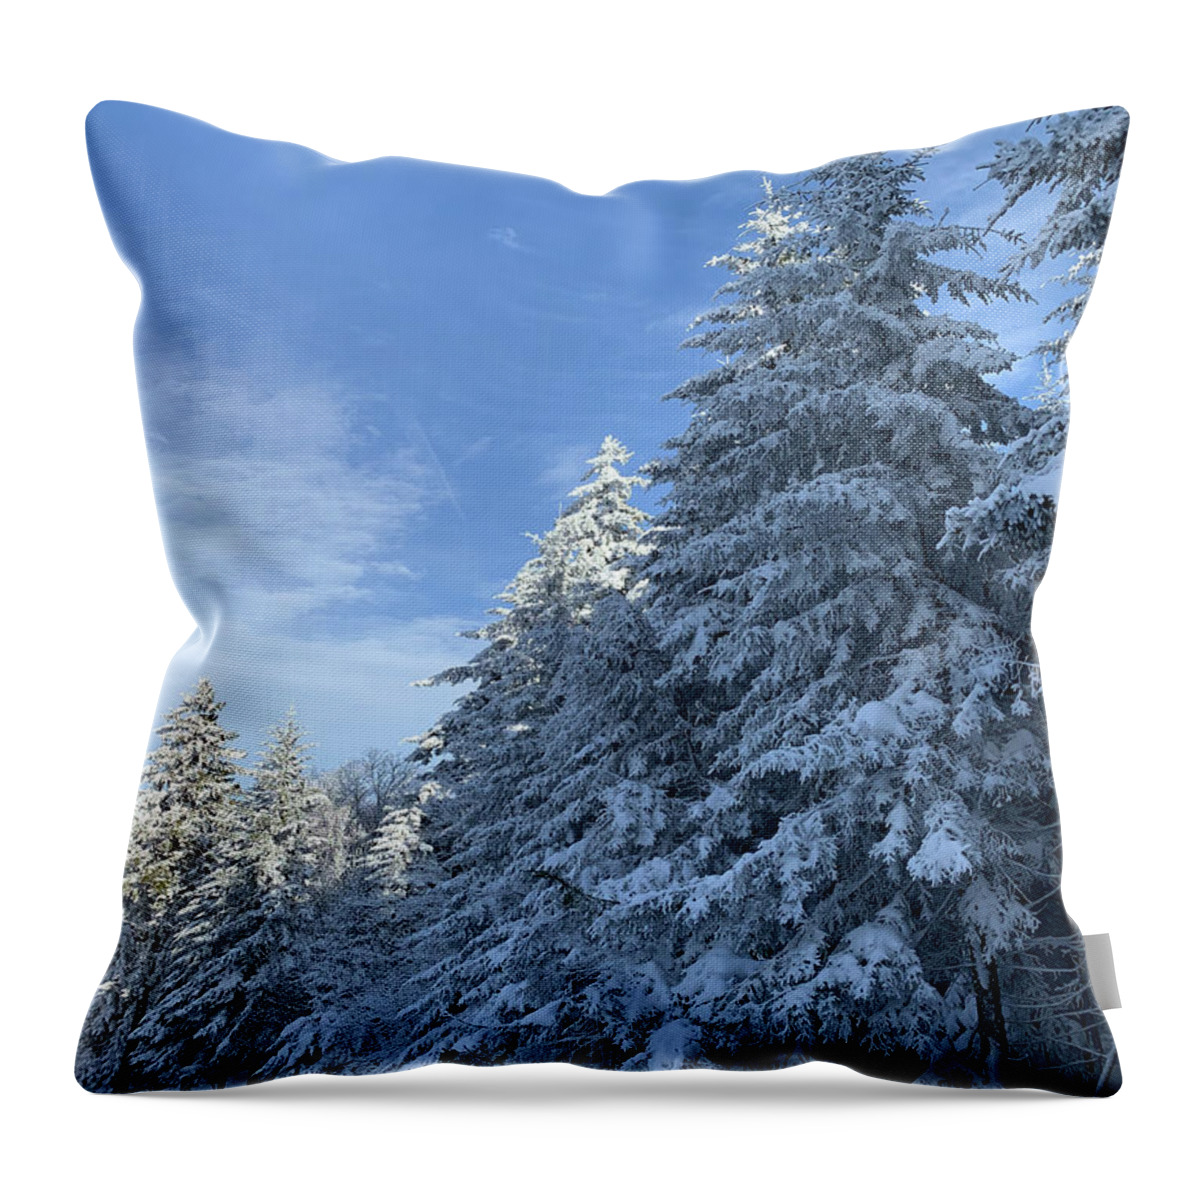  Throw Pillow featuring the photograph Winter Wonderland by Annamaria Frost